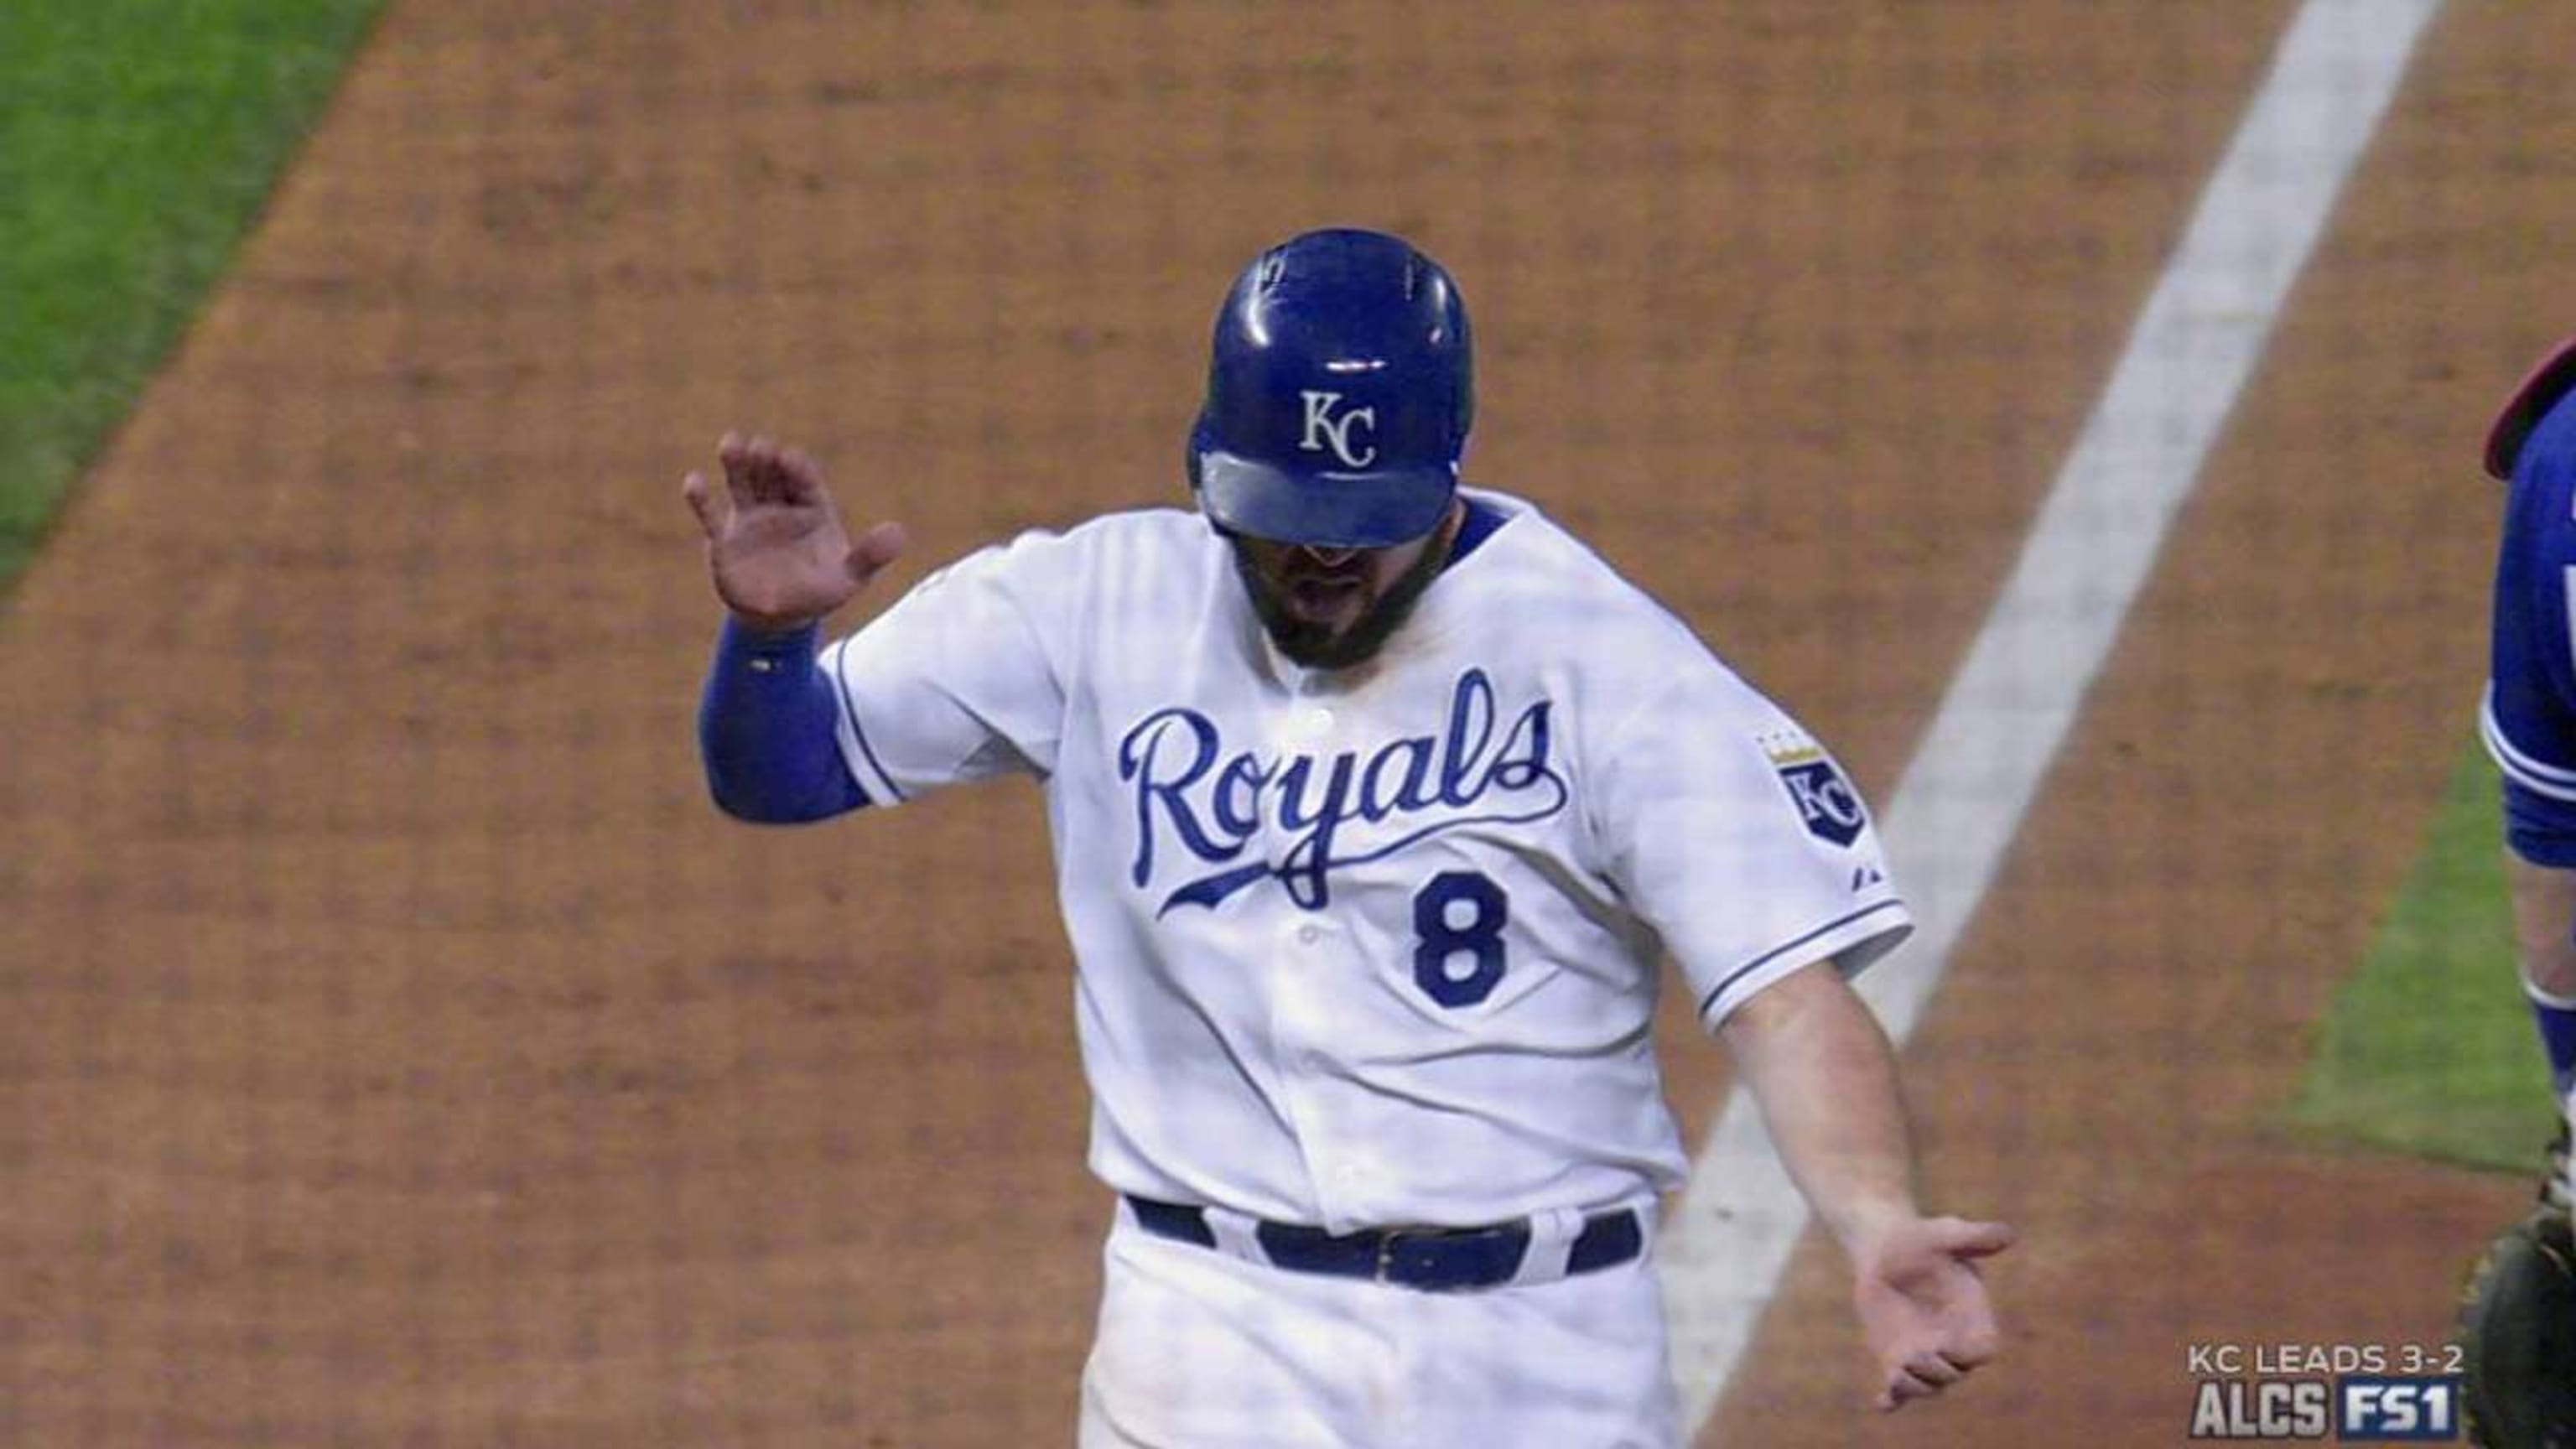 Royals return to World Series, beat Blue Jays in ALCS Game 6 - The Columbian